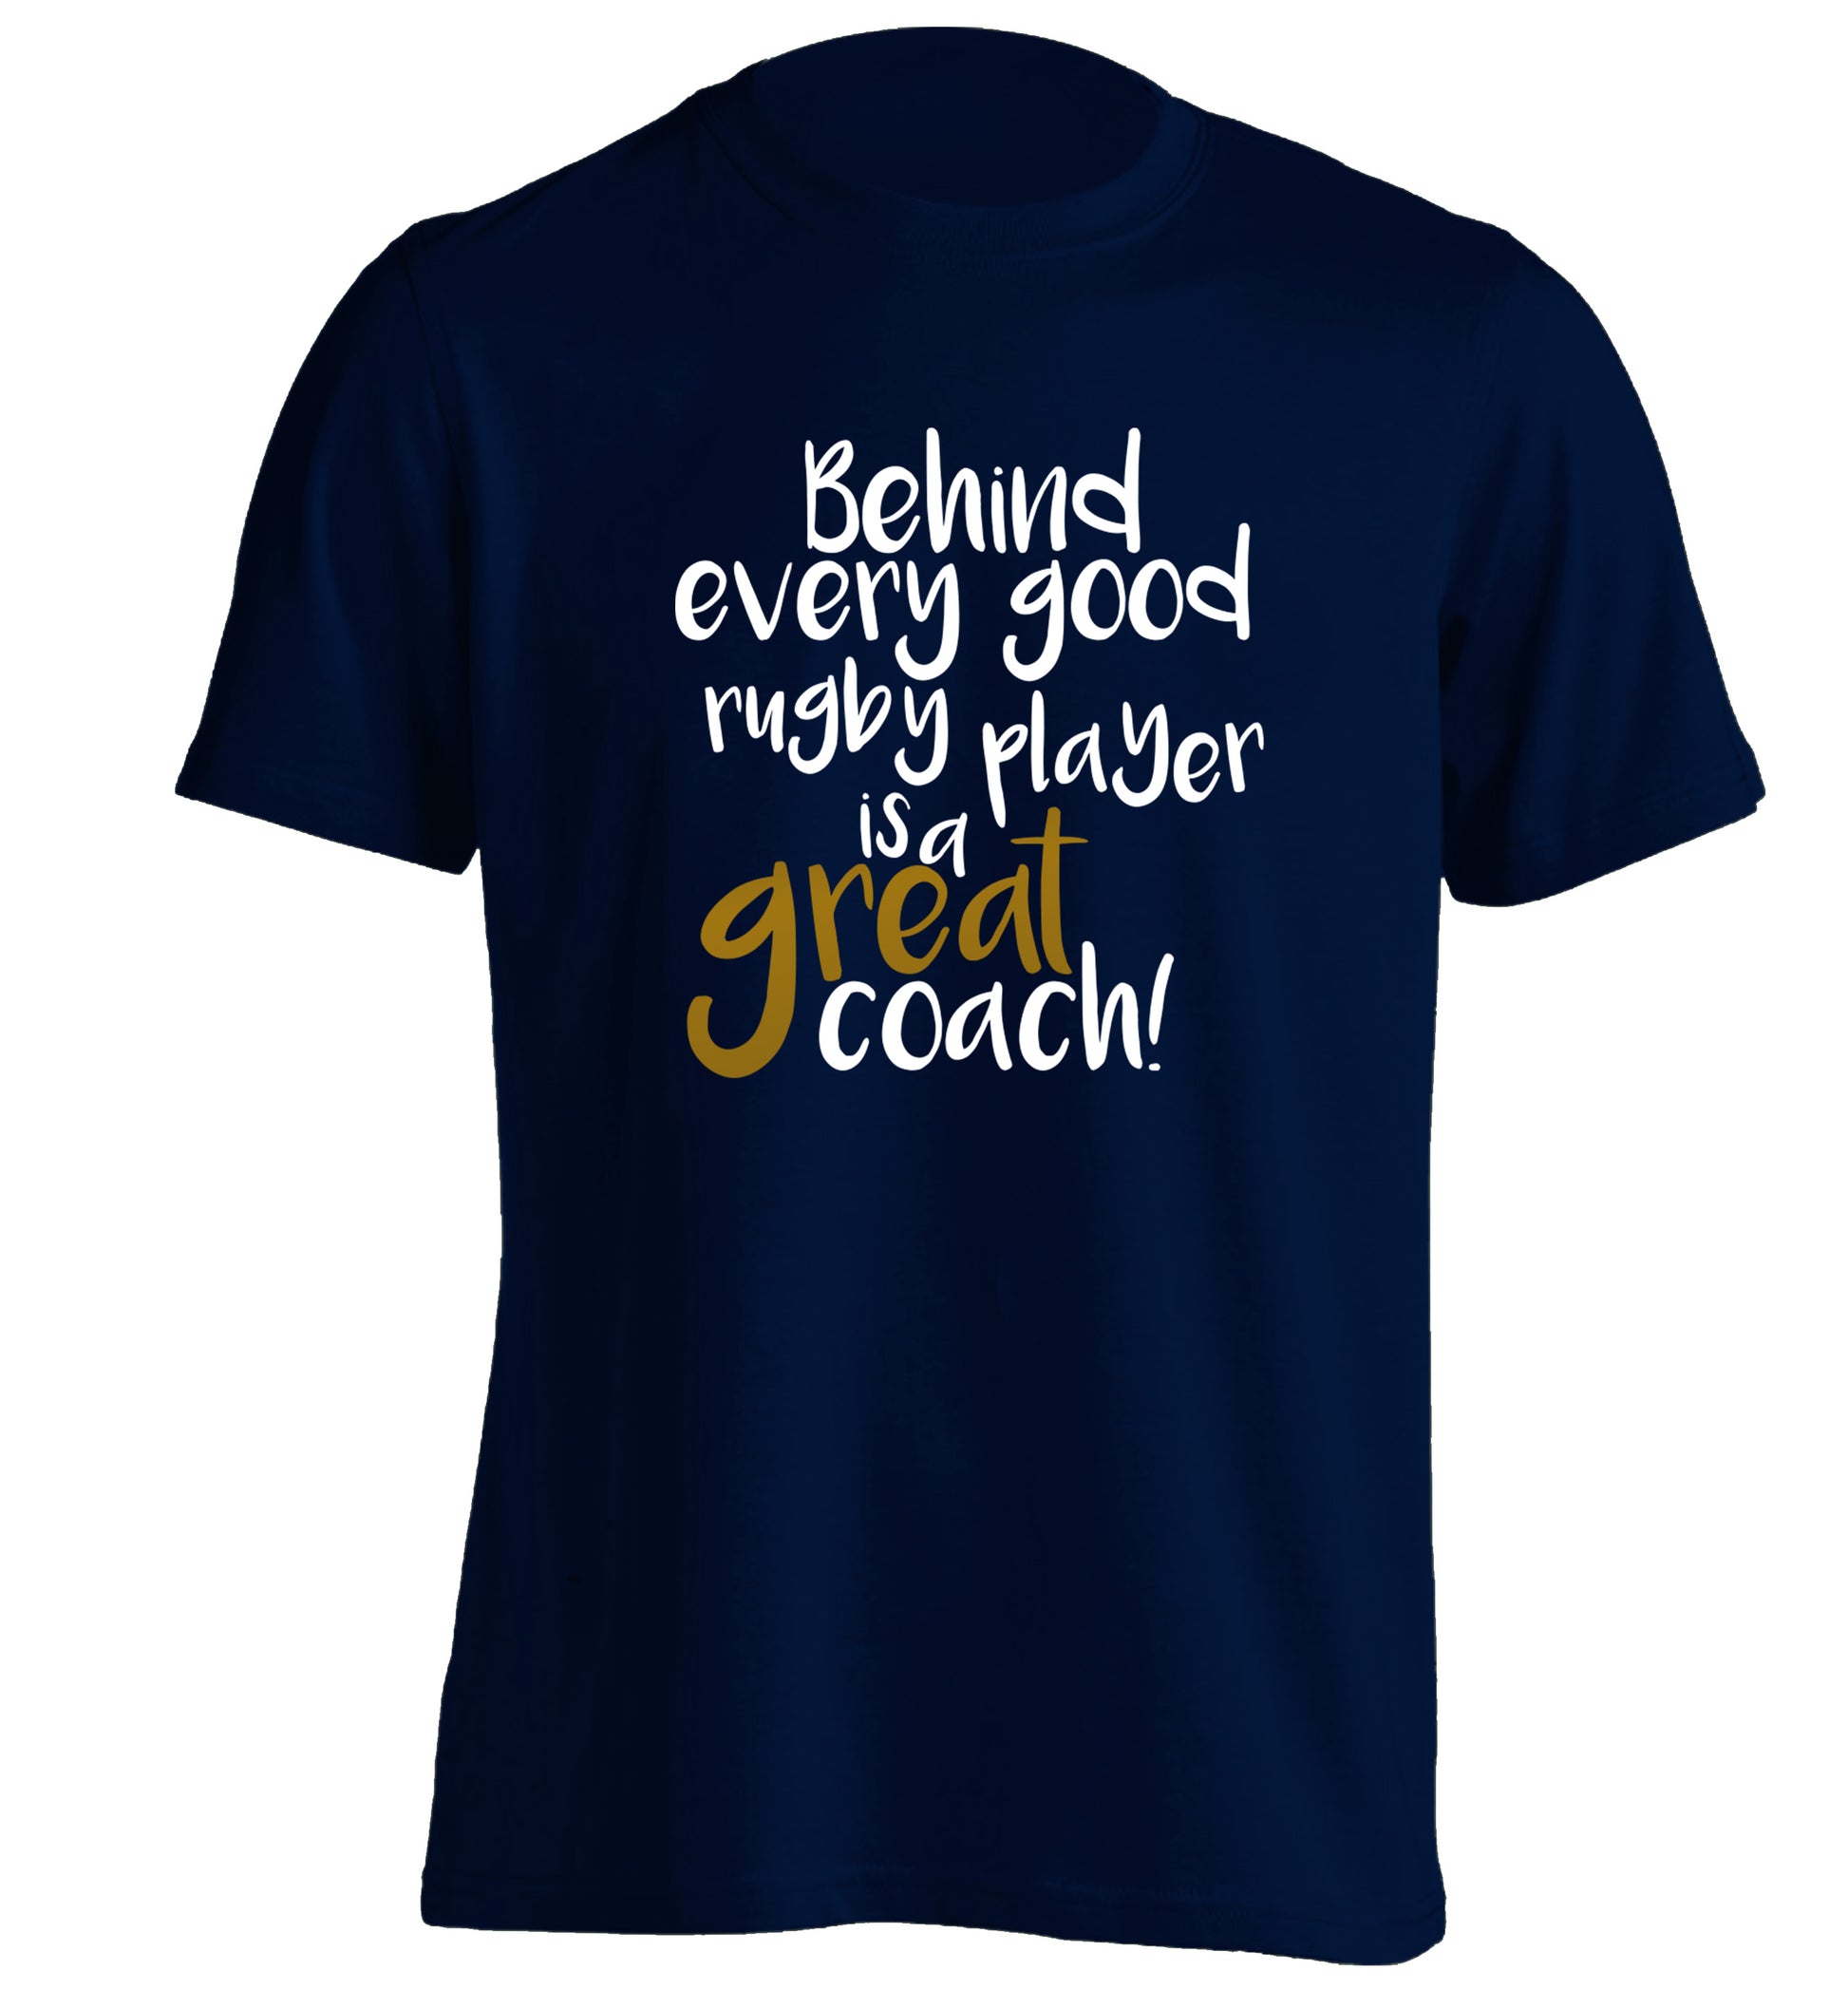 Behind every goor rugby player is a great coach adults unisex navy Tshirt 2XL